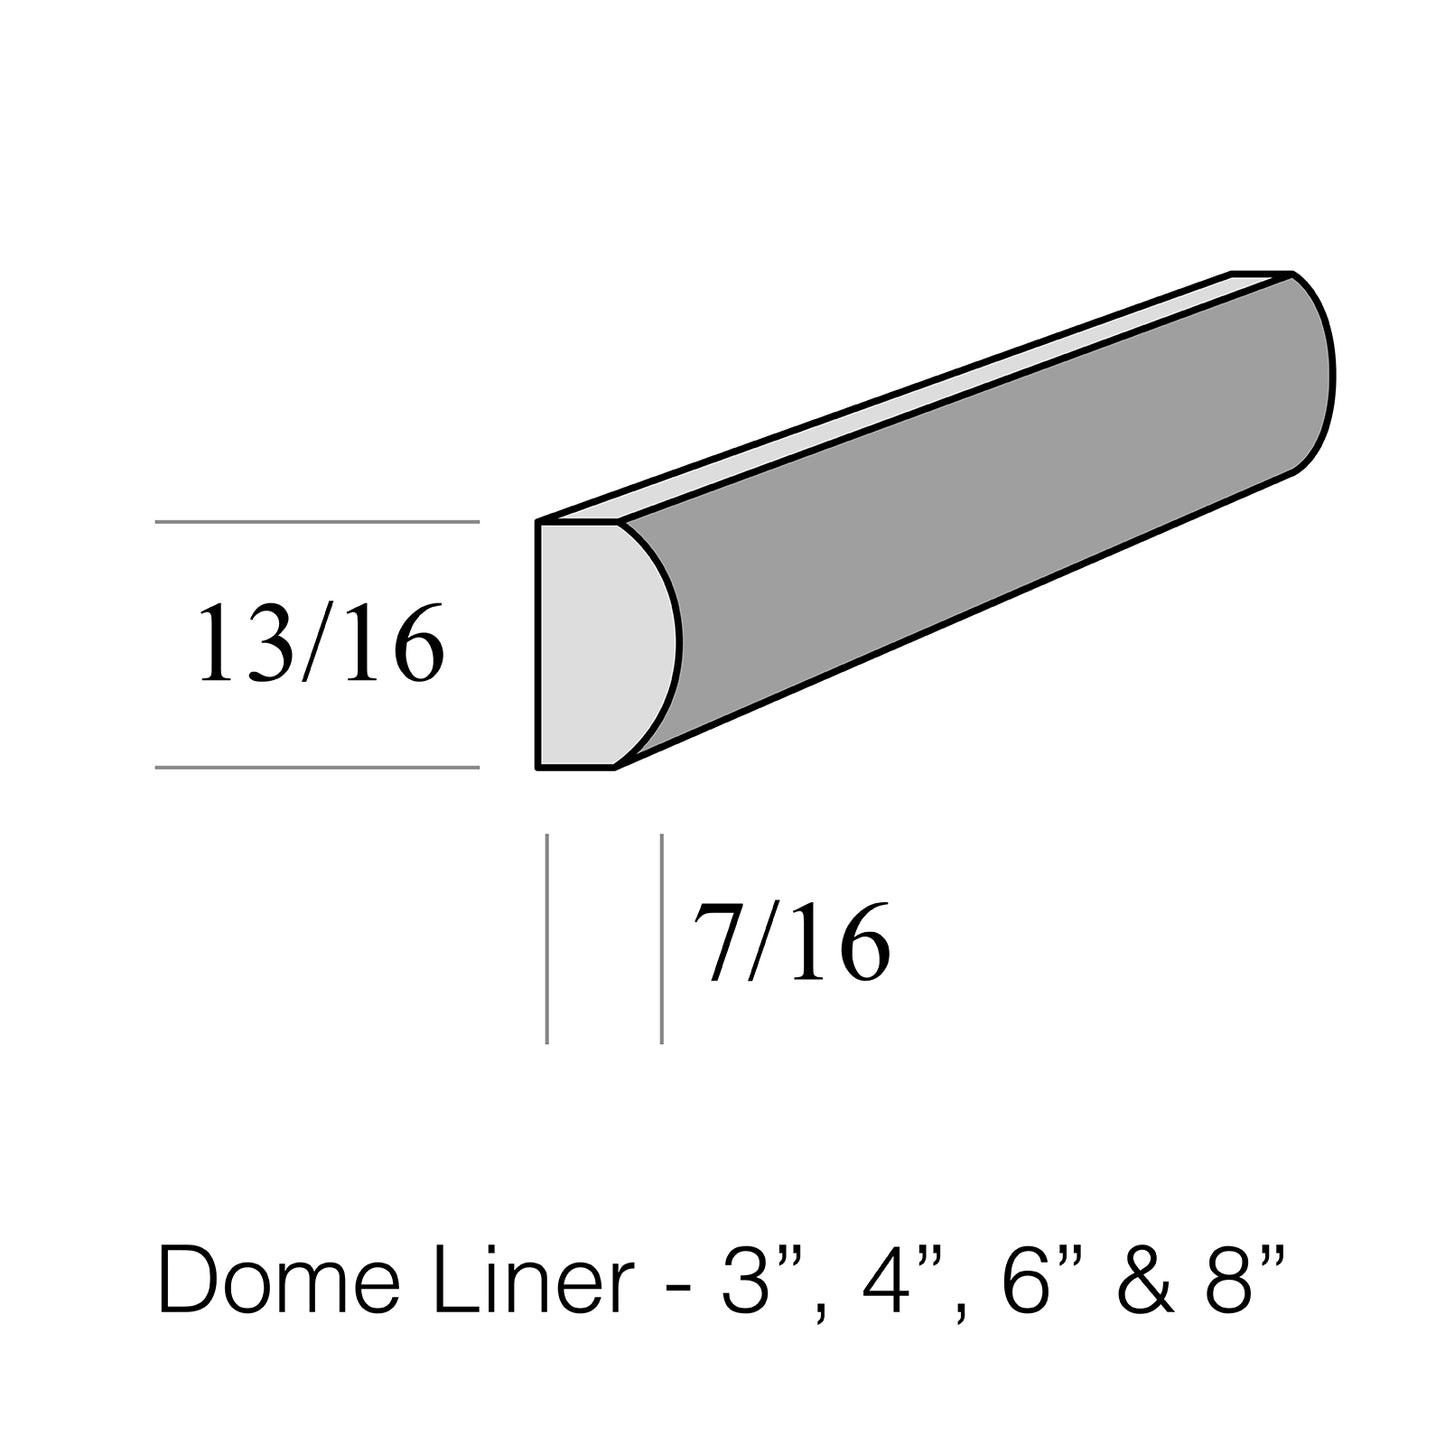 Dome Liner 4"